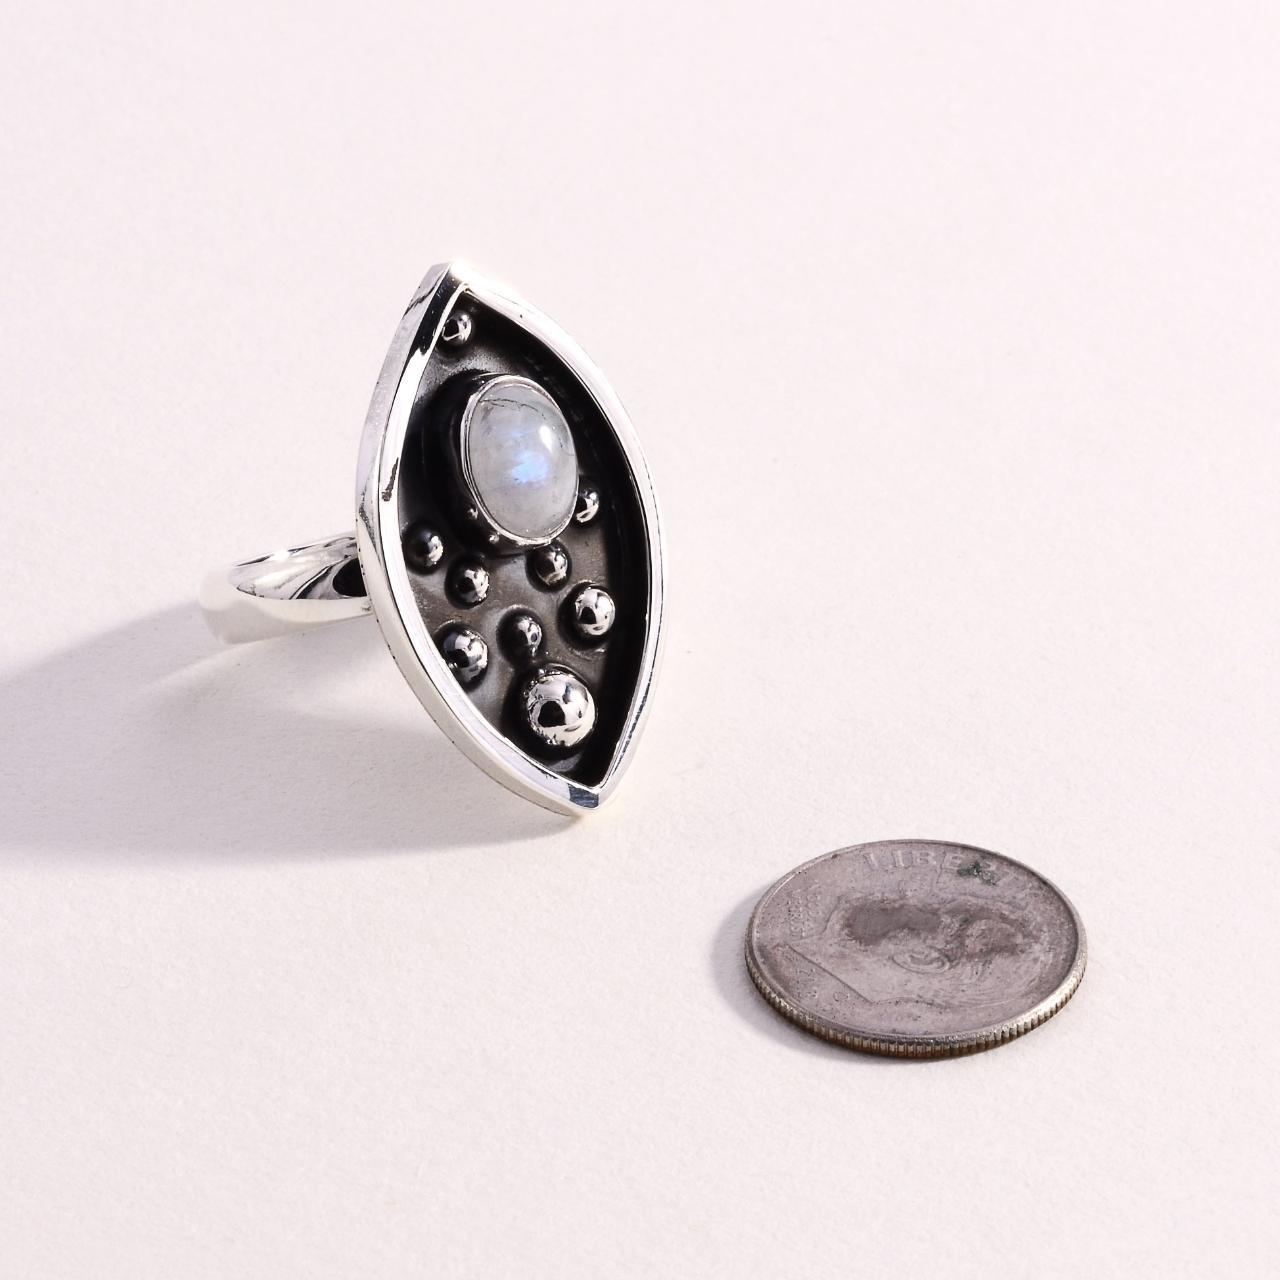 Product Image 3 - Sterling 925 Moonstone Ring

Sterling Silver

Size